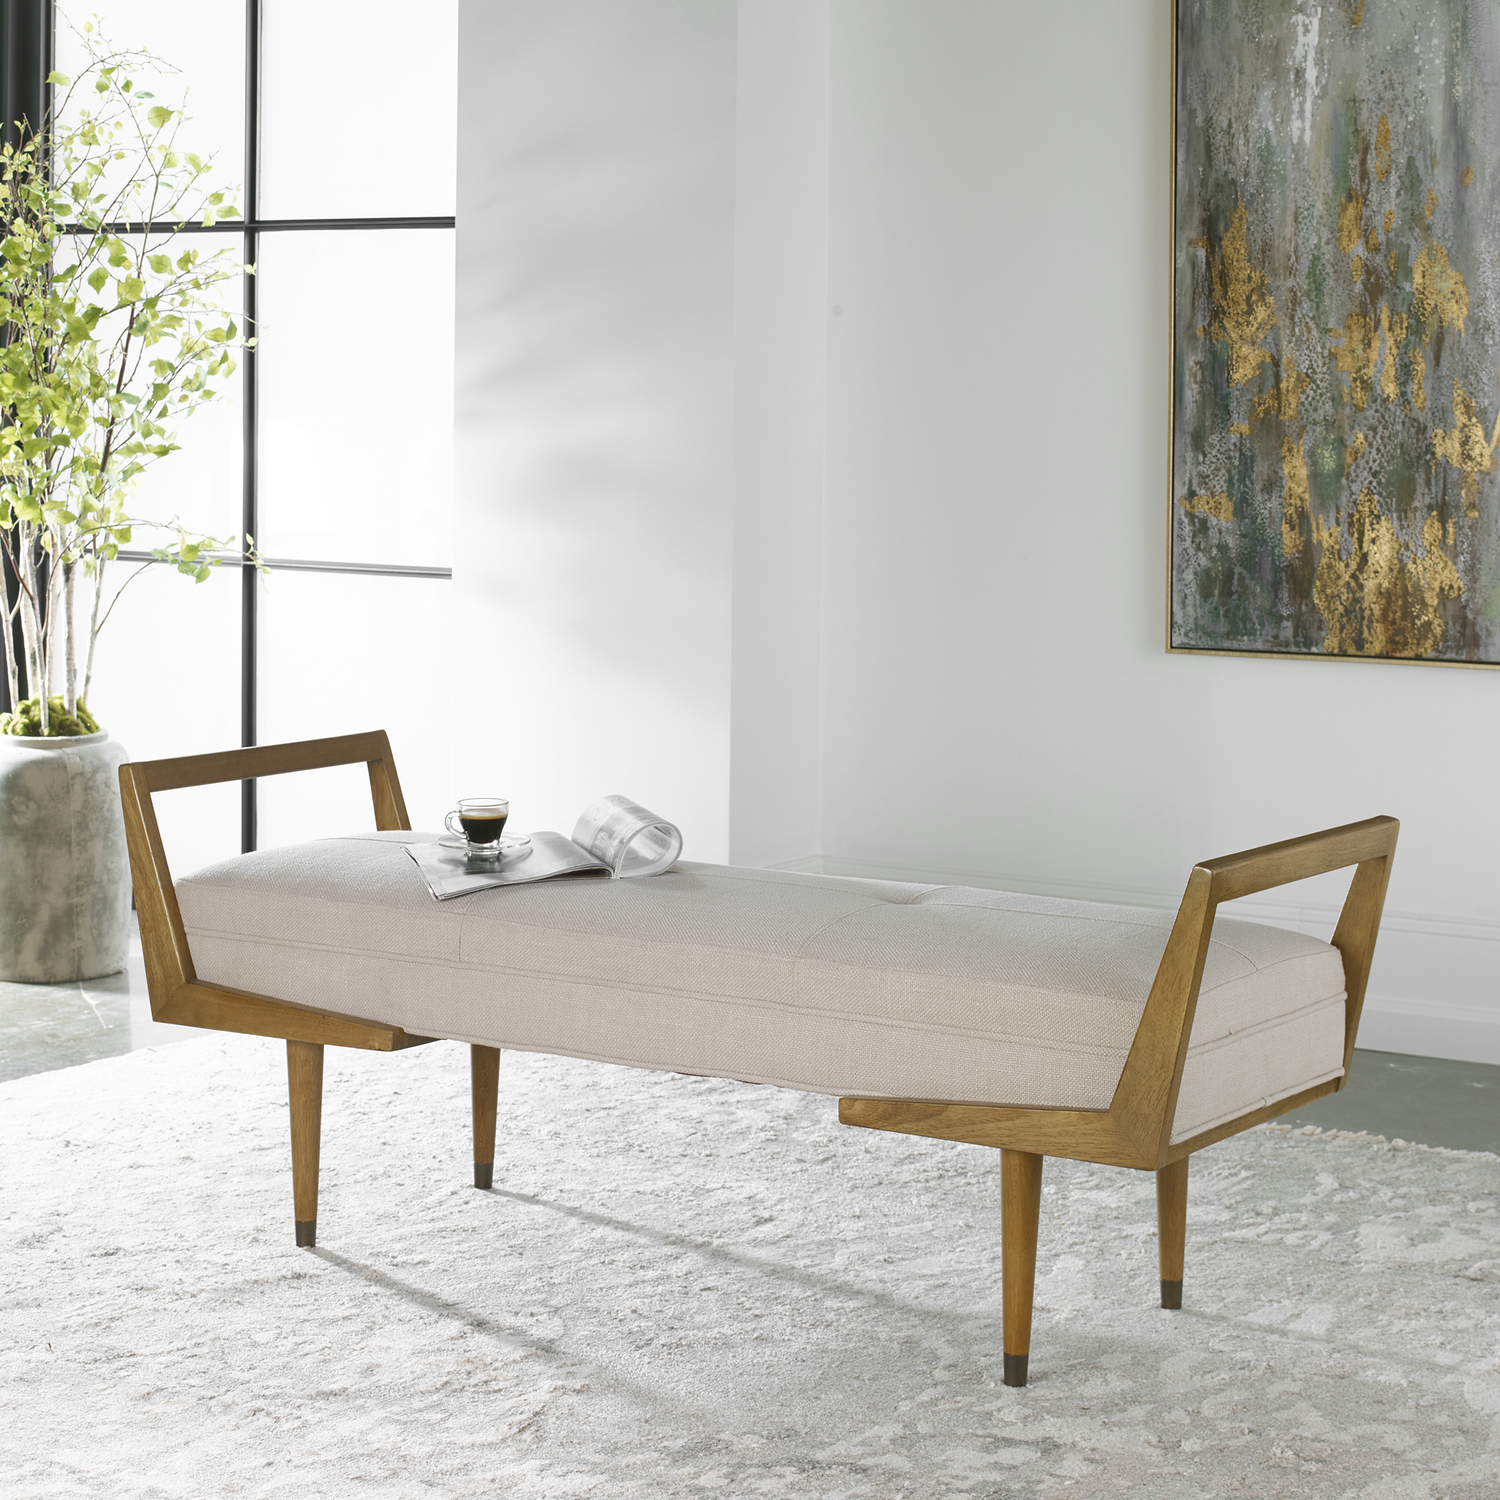 square fabric ottoman Uttermost Benches A Bench For Extra Seating With A Mid-century Twist In Its Modern Birch Wood Frame Lightly Finished In A Smooth Oak Finish, With A Tufted Bench Seat In A Woven Ivory Fabric. Seat Height Is 19".